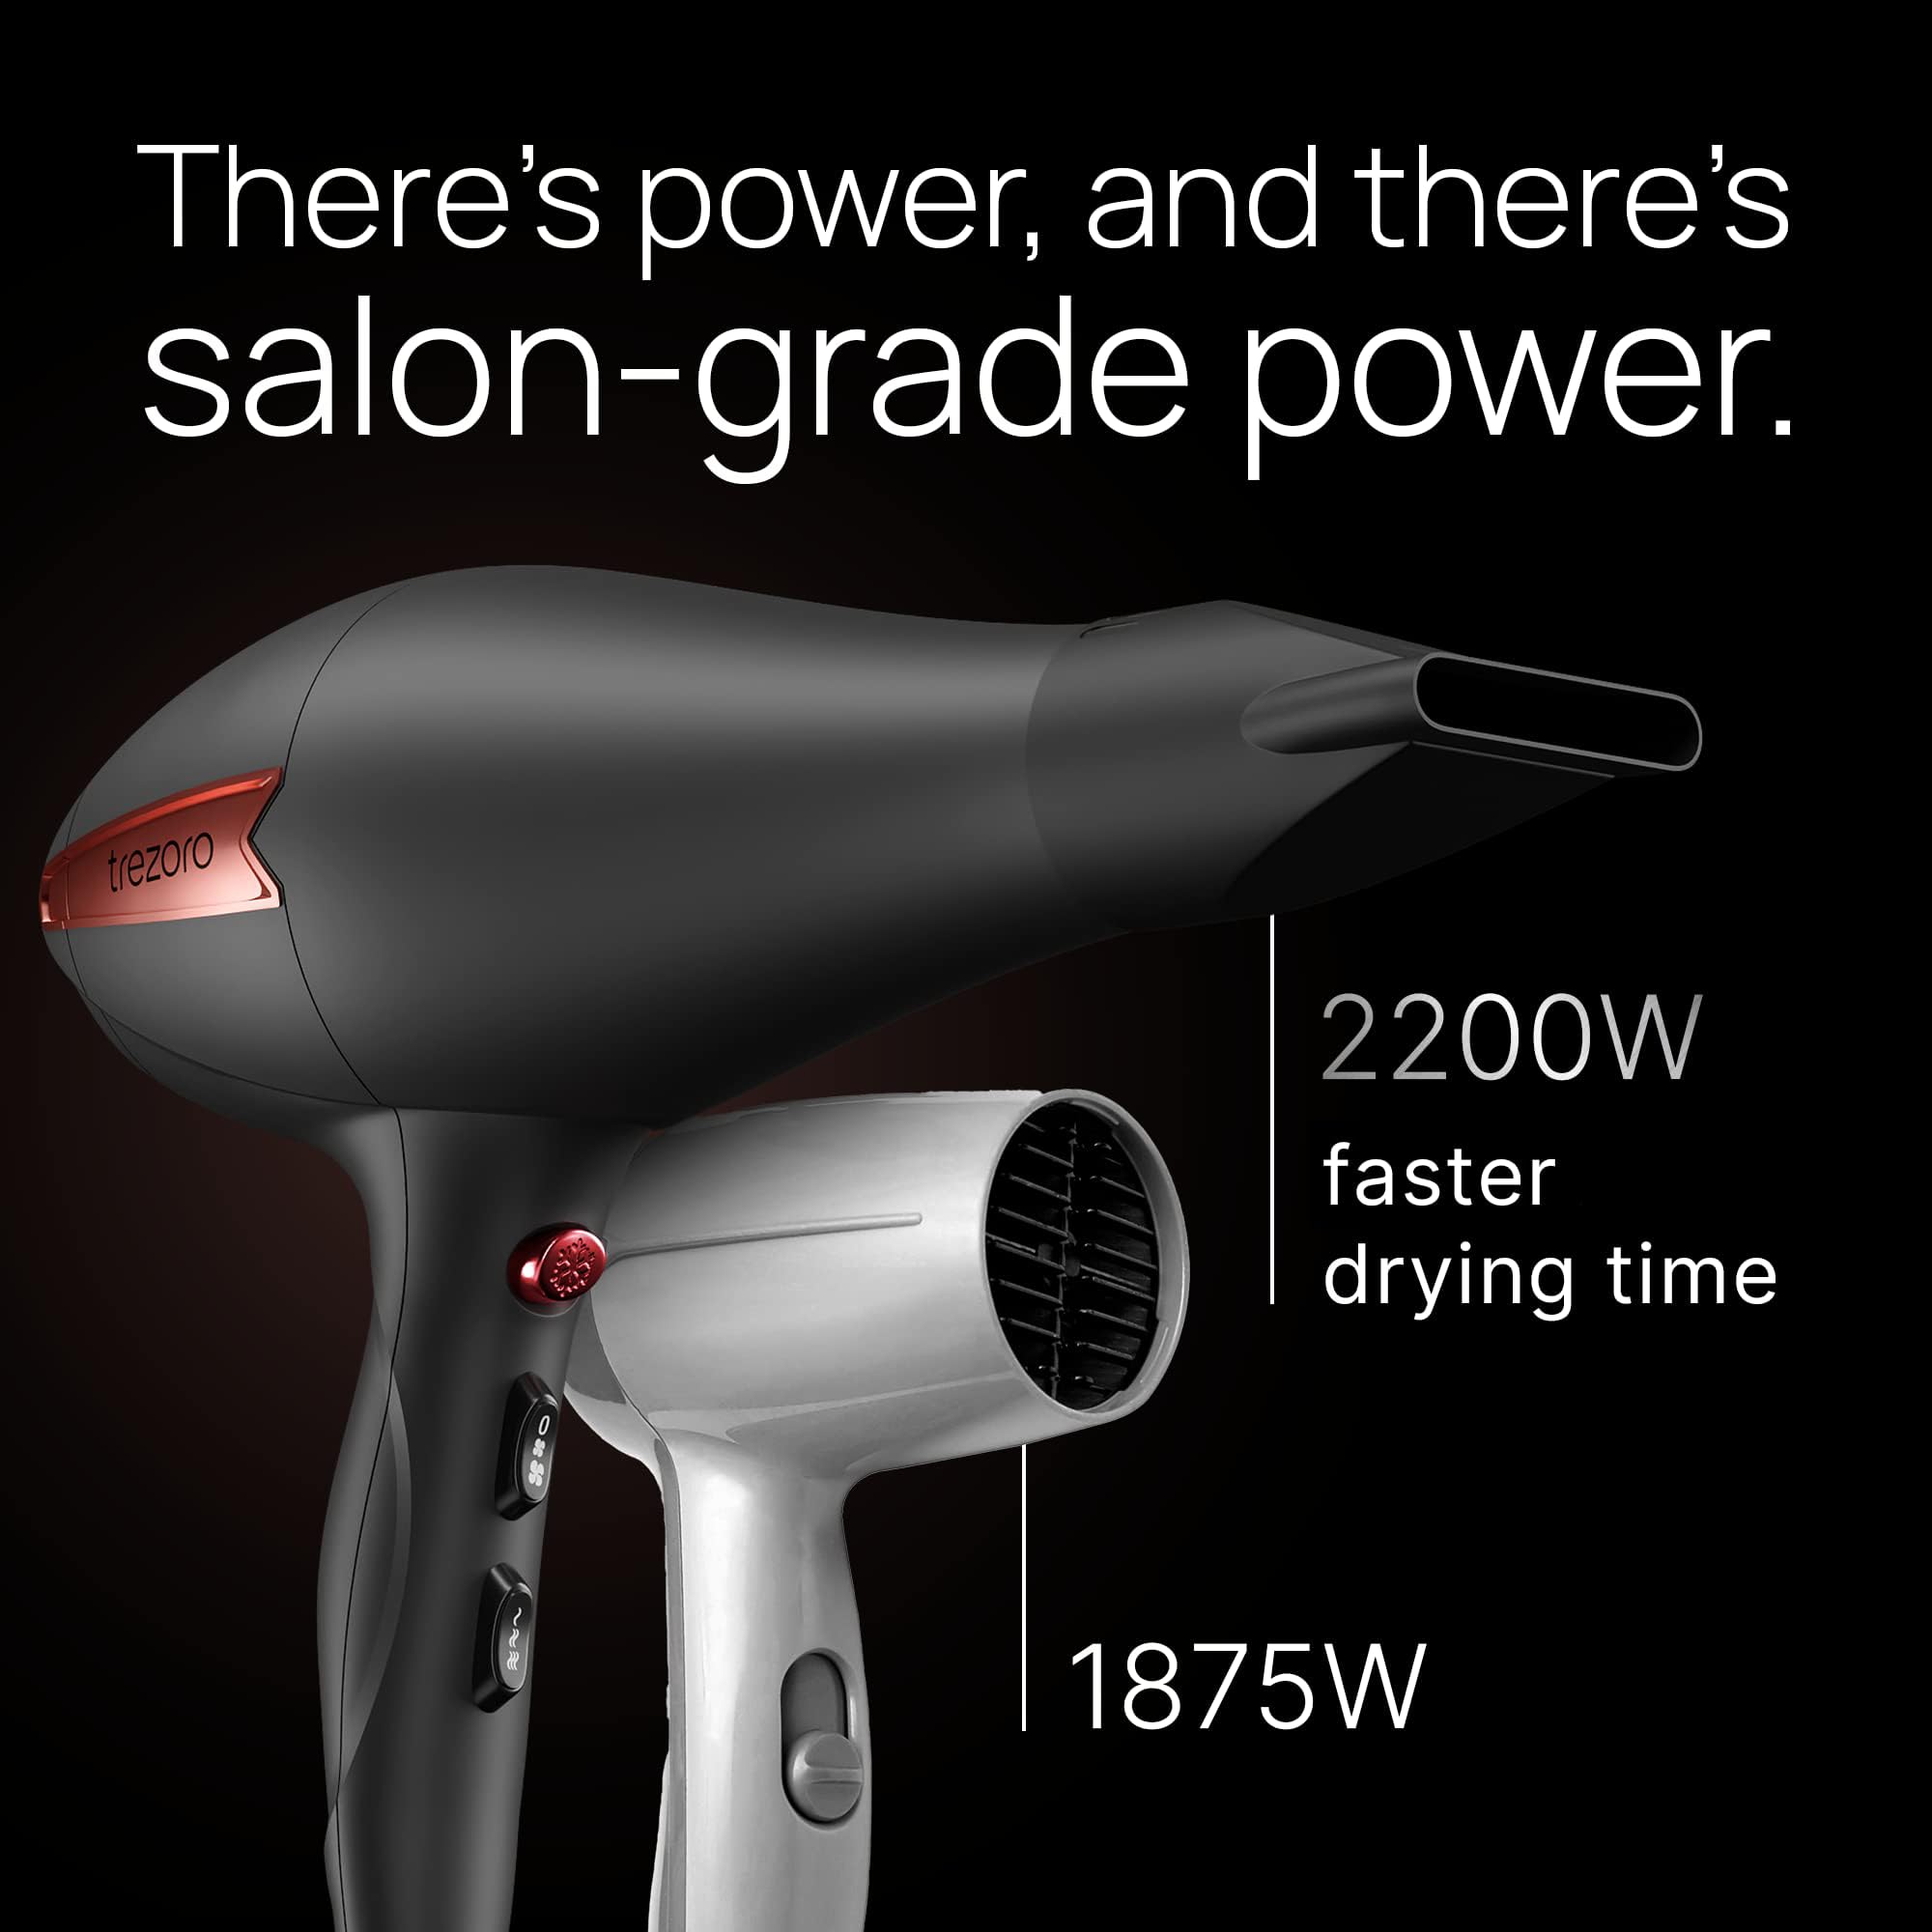 Professional 2200W Ionic Salon Hair Dryer - Professional Blow Dryer - Lightweight Travel Hairdryer for Normal & Curly Hair Includes Volume Styling Nozzle